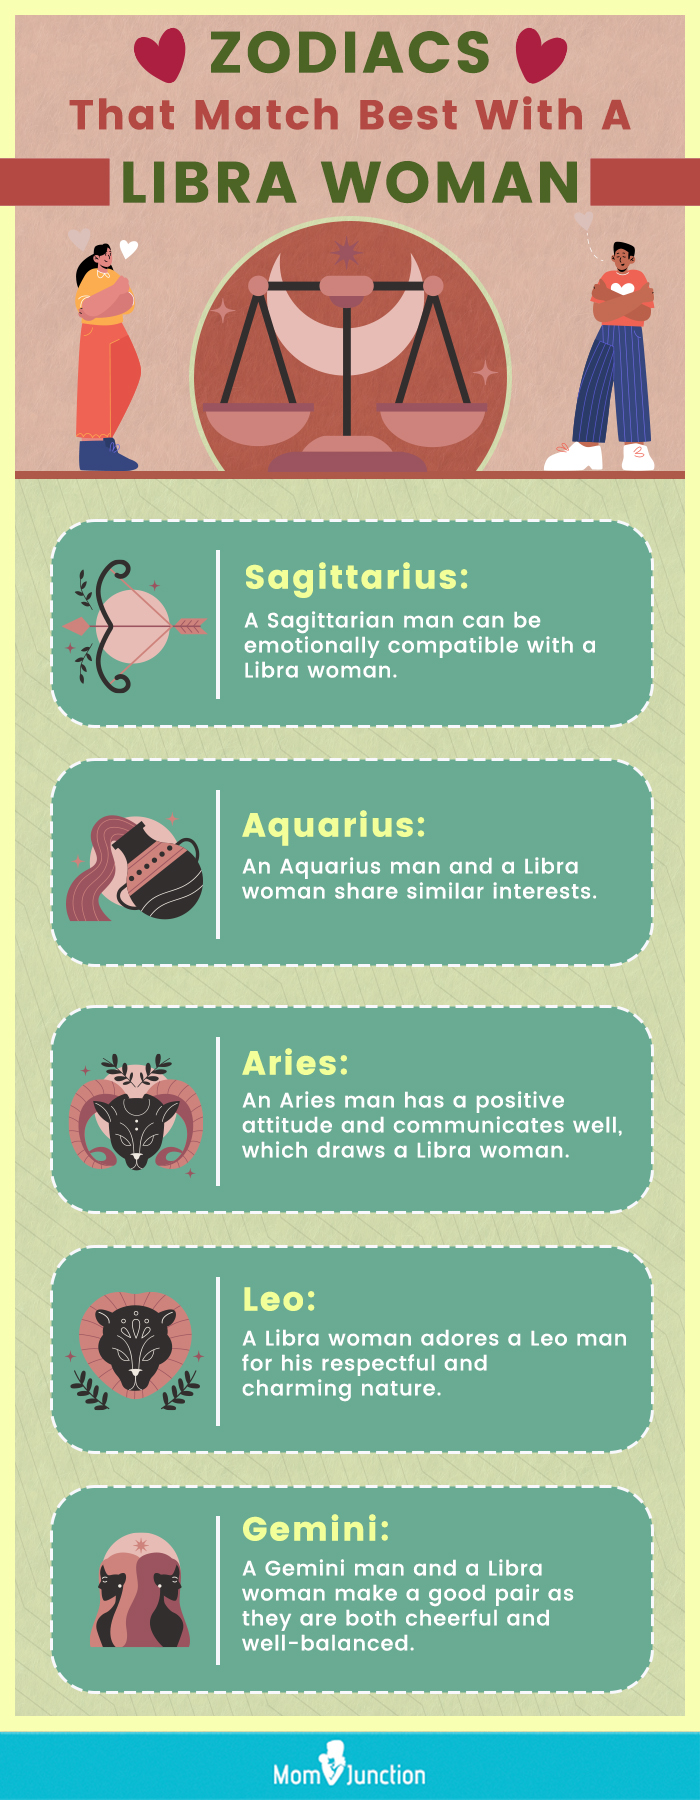 zodiacs that match best with a libra woman [infographic]